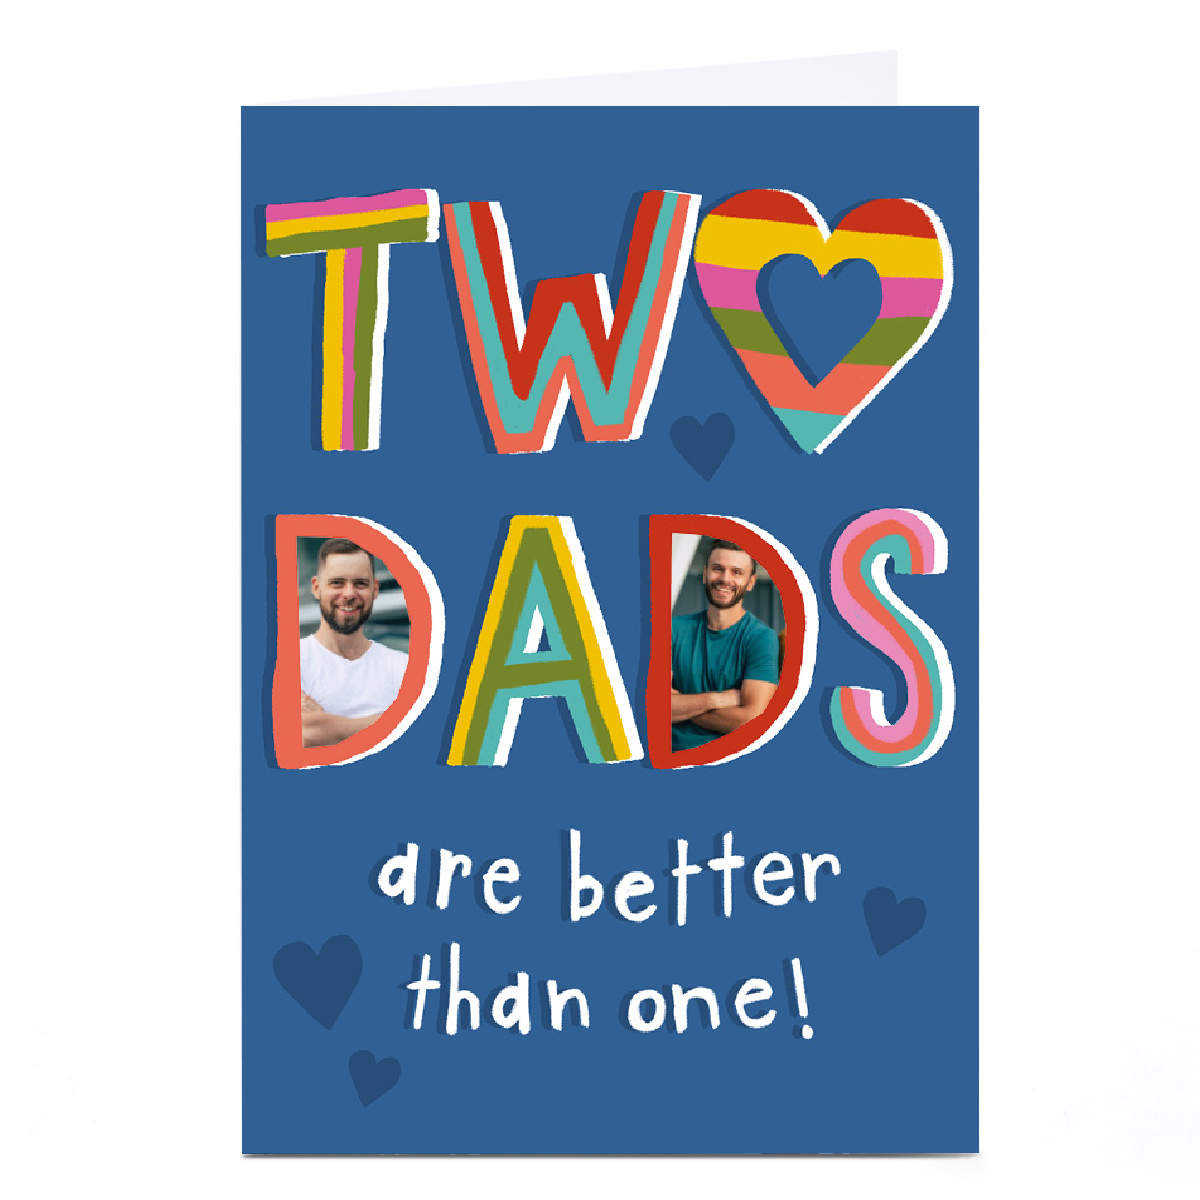 Personalised Kerry Spurling Father's Day Photo Card - Two Dads